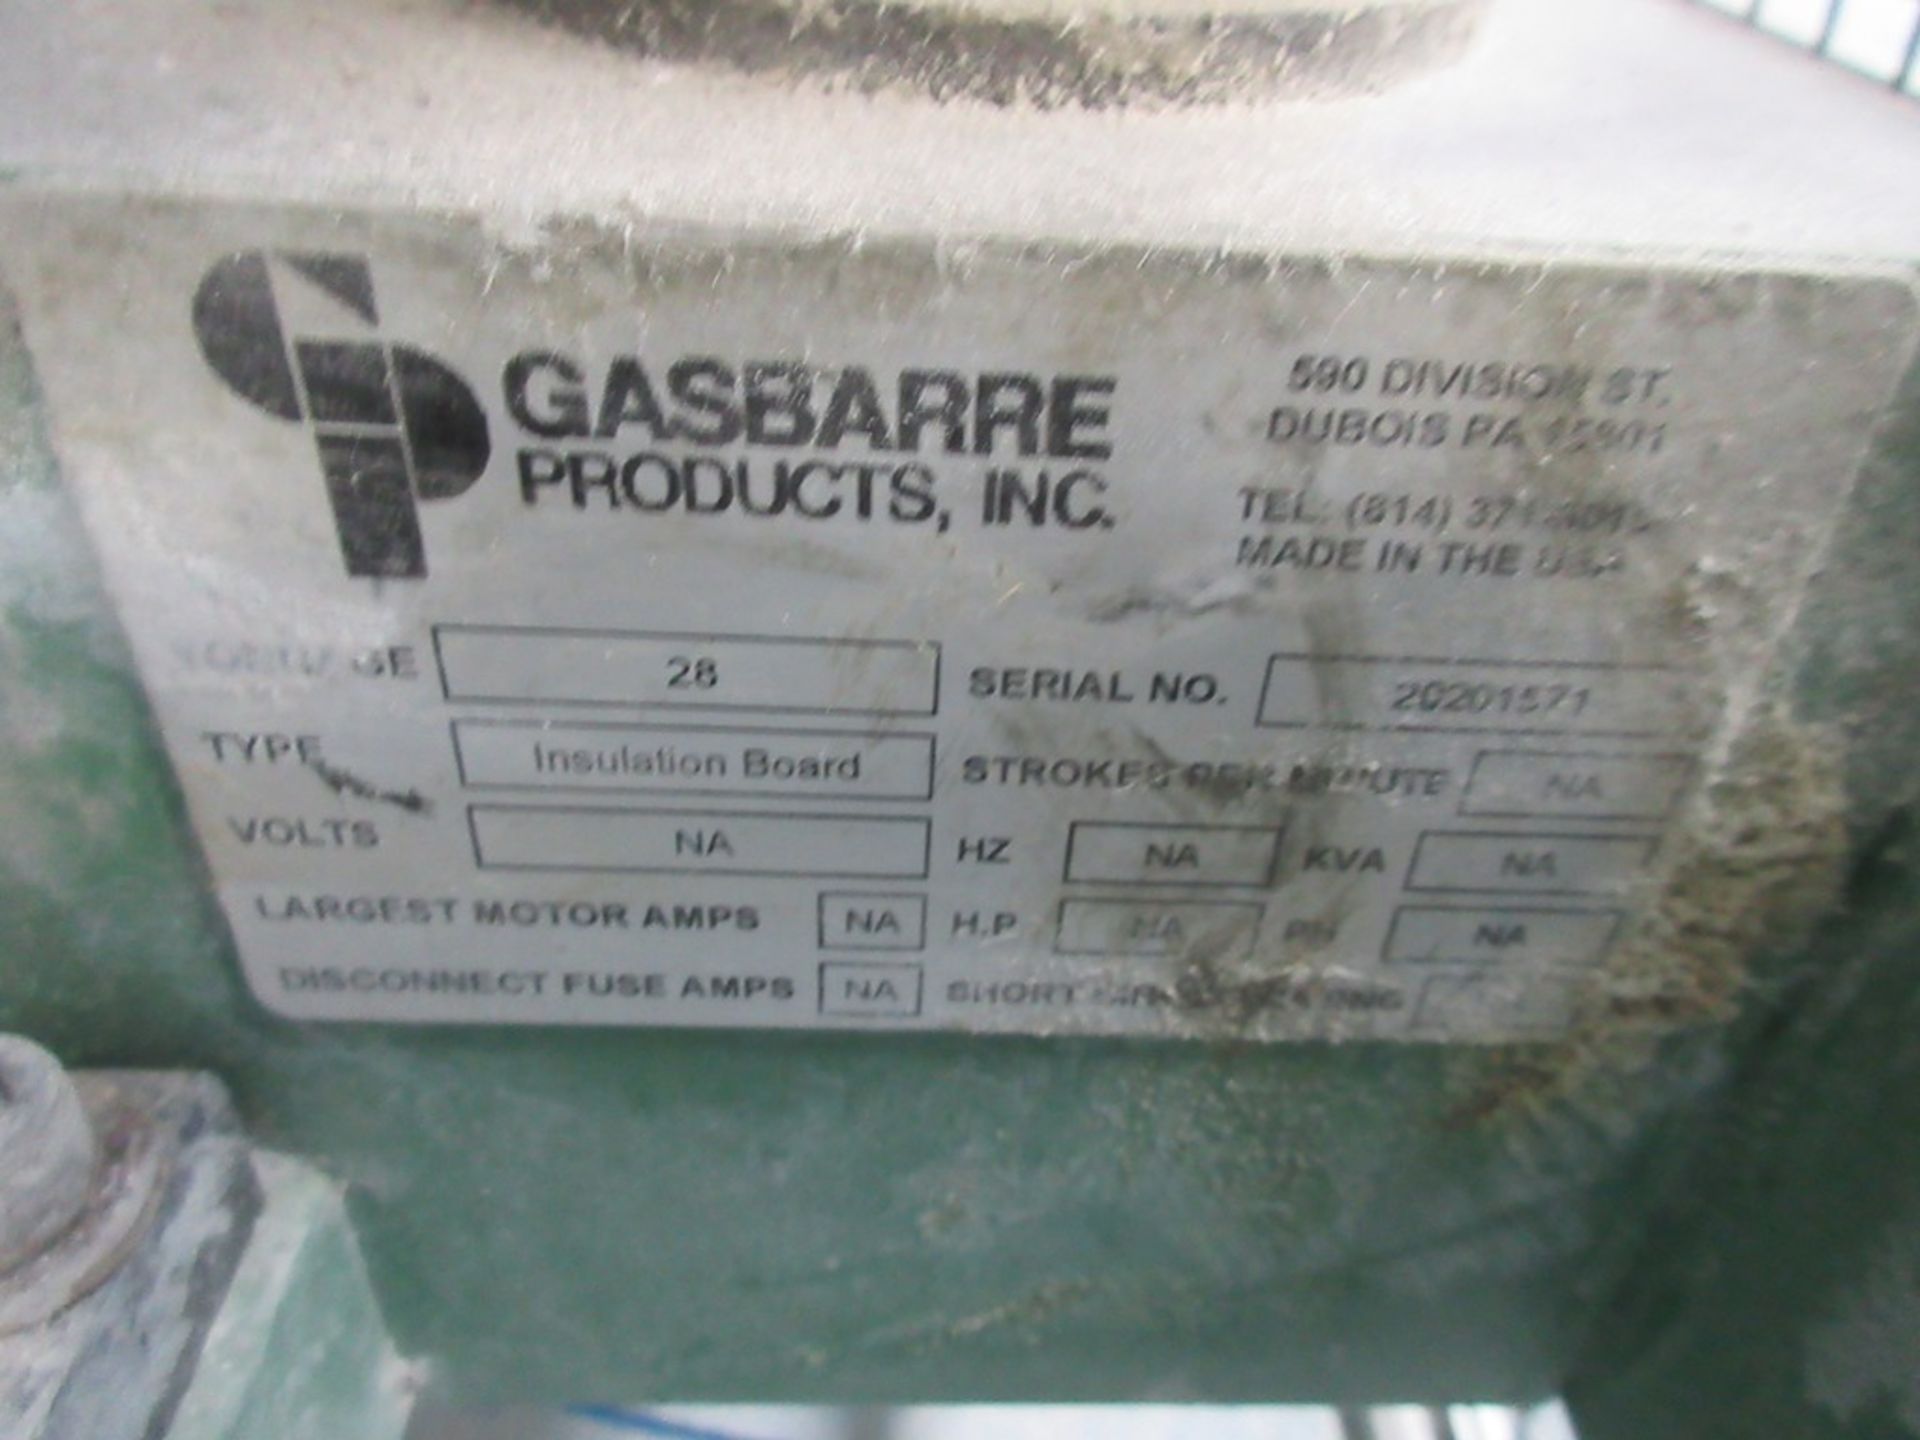 Gasbarre insulation board, 28 tonne electric press, serial no. 20201571, bed size 680 x 980mm, - Image 4 of 12